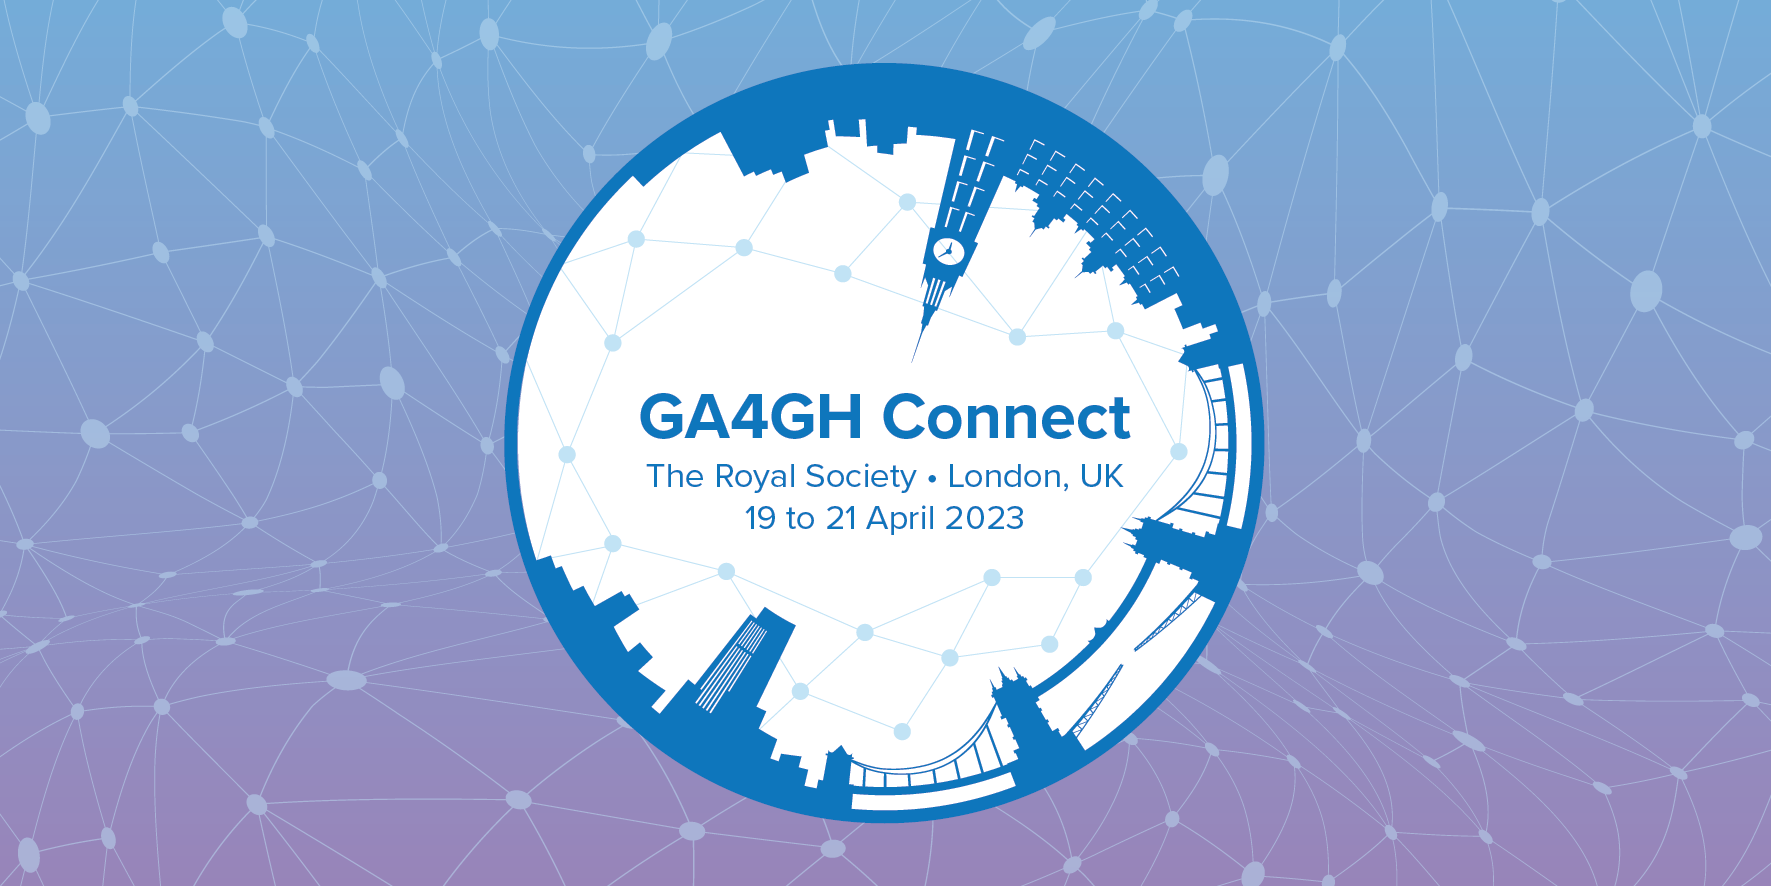 GA4GH Connect 2023 meeting banner featuring London cityscape curved around a circle with an abstract background pattern.